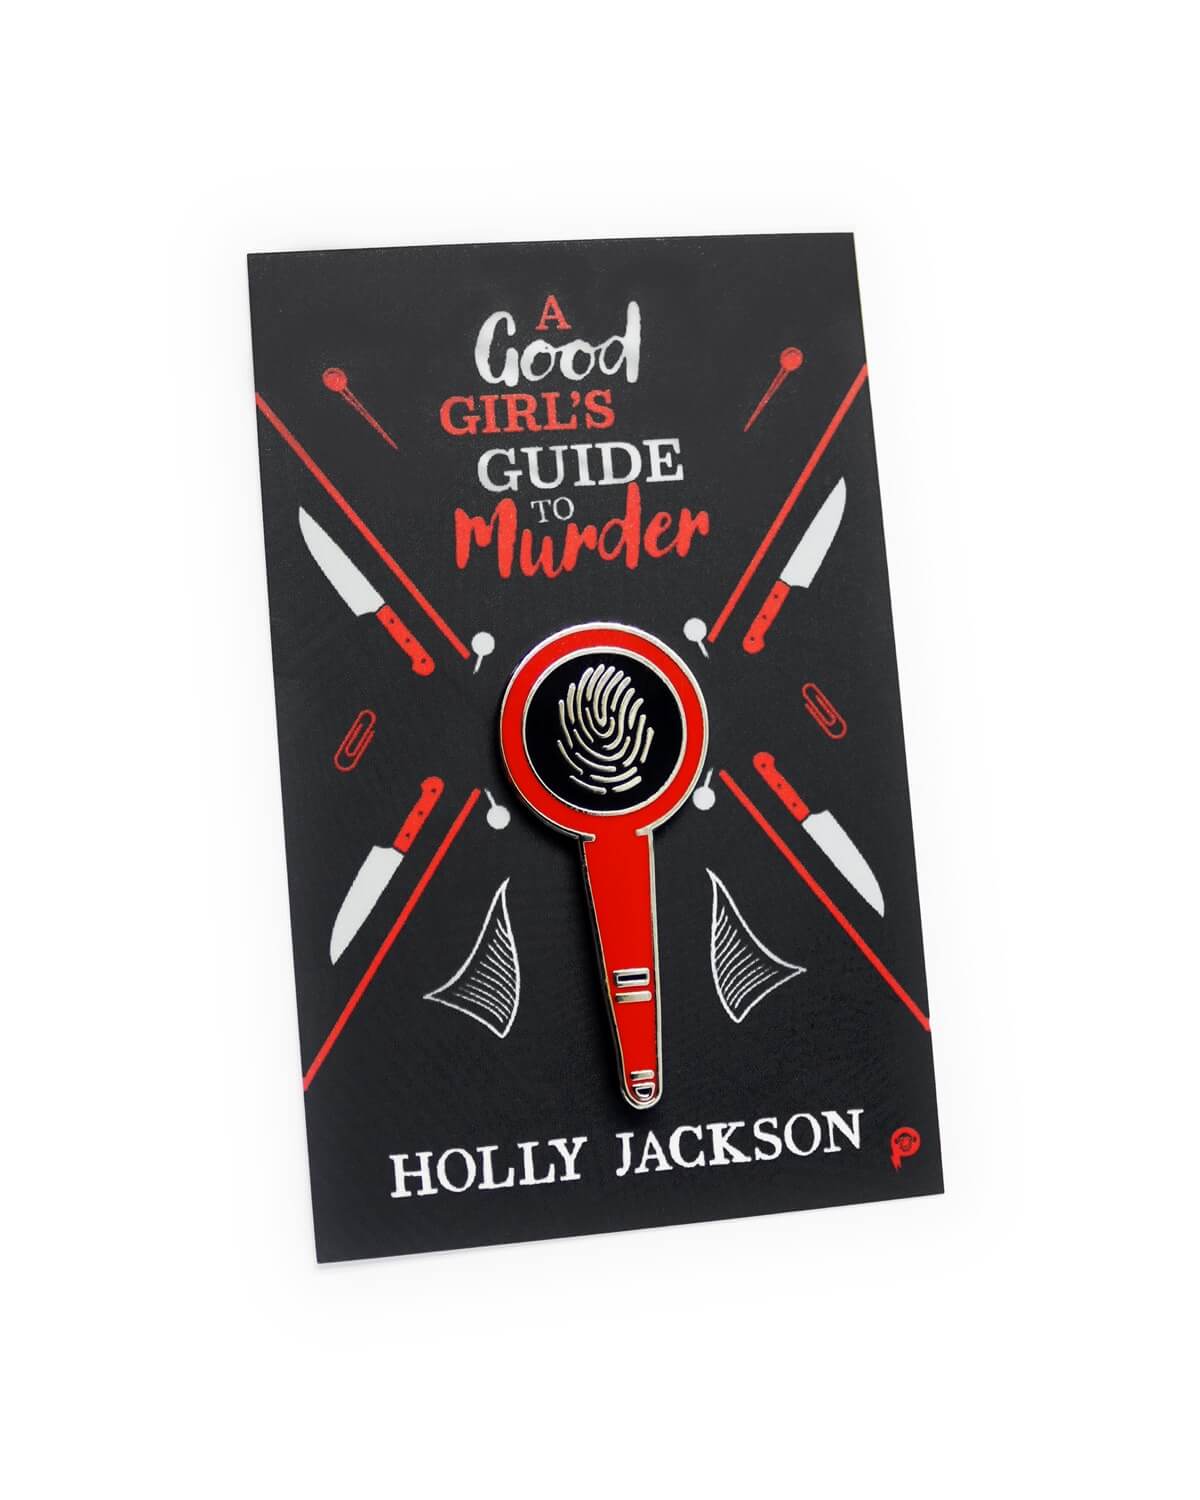 A pin featuring a magnifying glass over a finger print on a backing card for A Good Girl's Guide to Murder by Holly Jackson